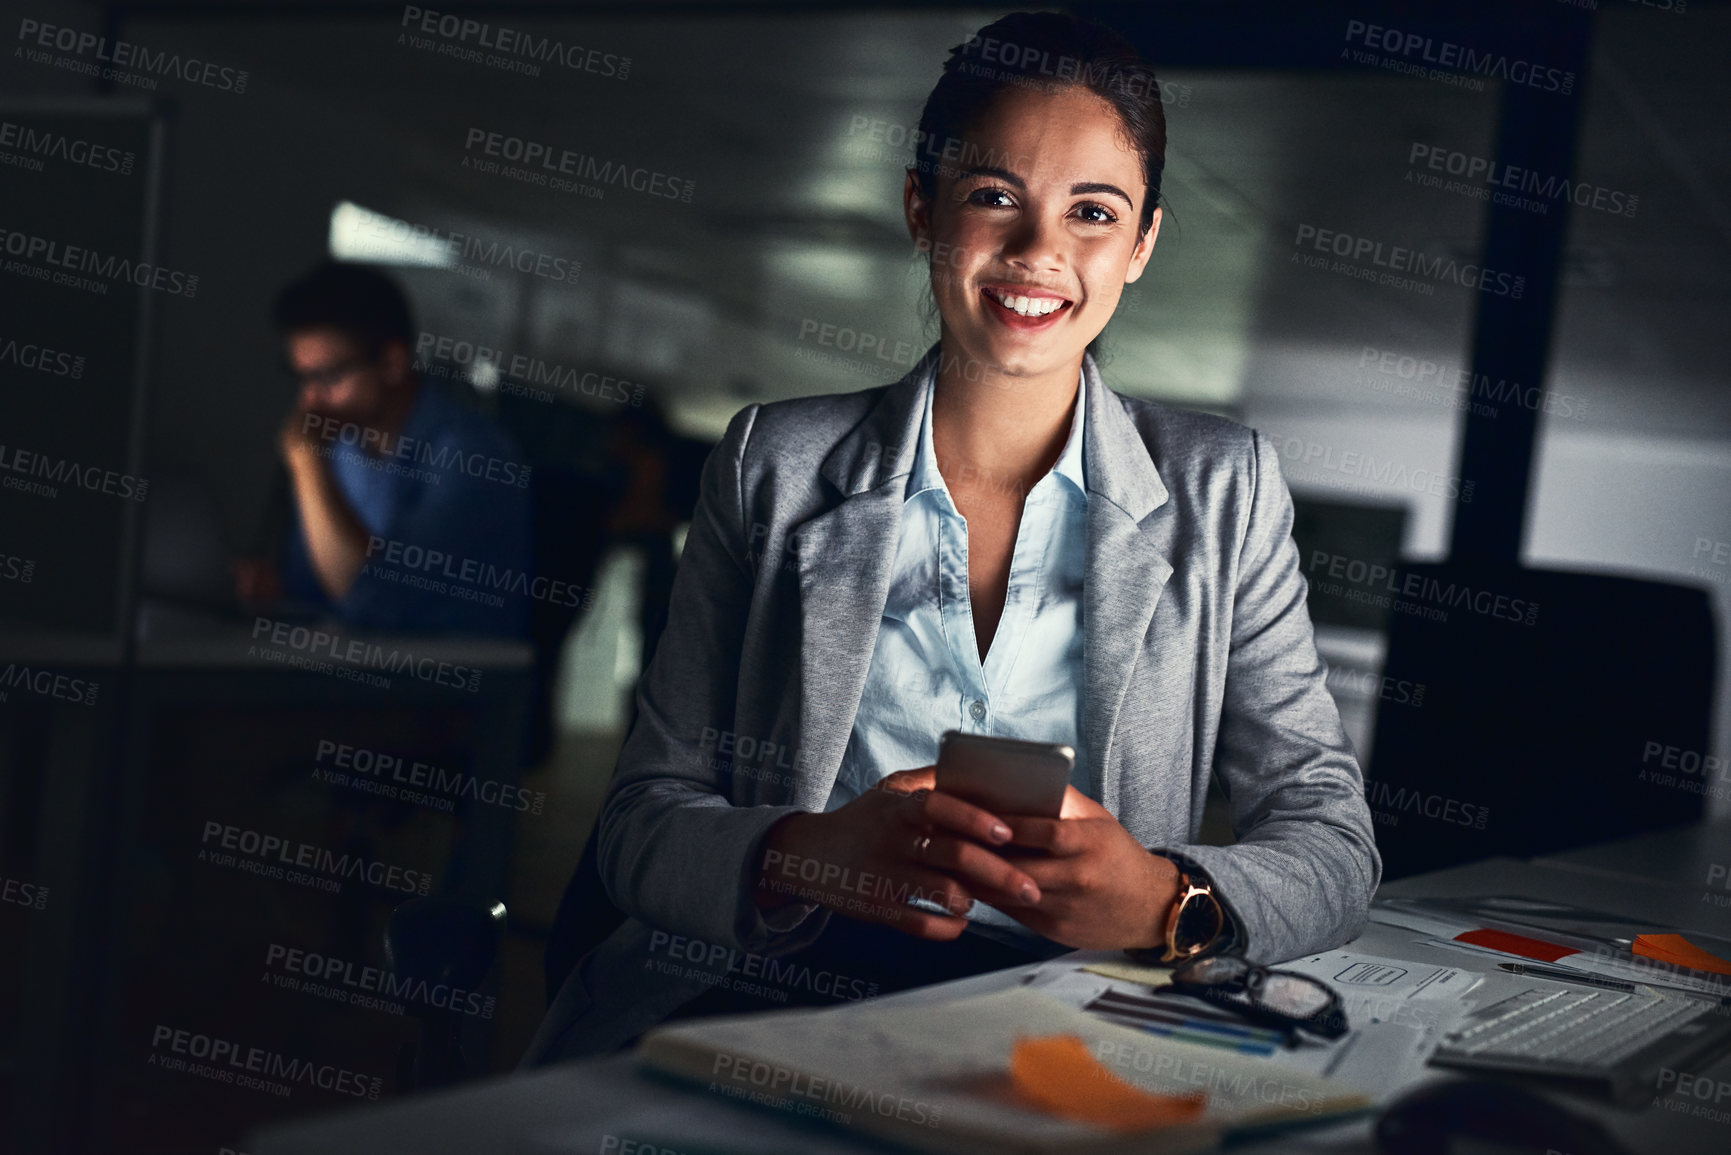 Buy stock photo Shot of a young attractive businesswoman working late at night in a modern office